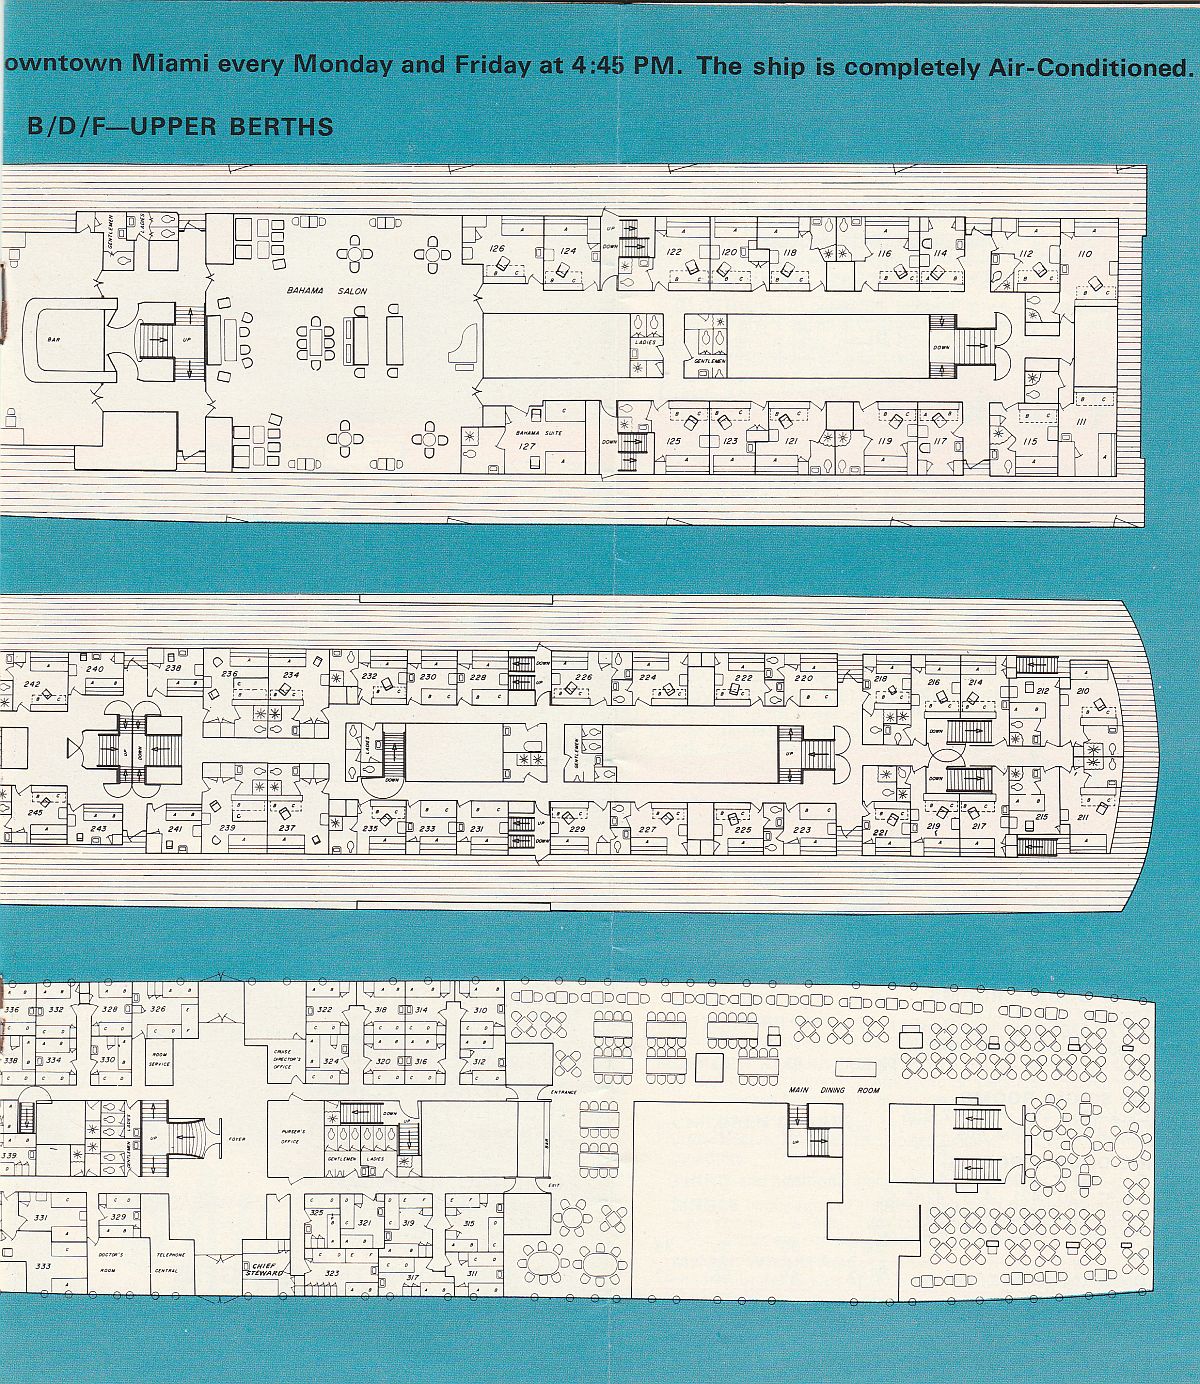 ss Bahama Star Deck plans (cont'd): Right page of deck plan